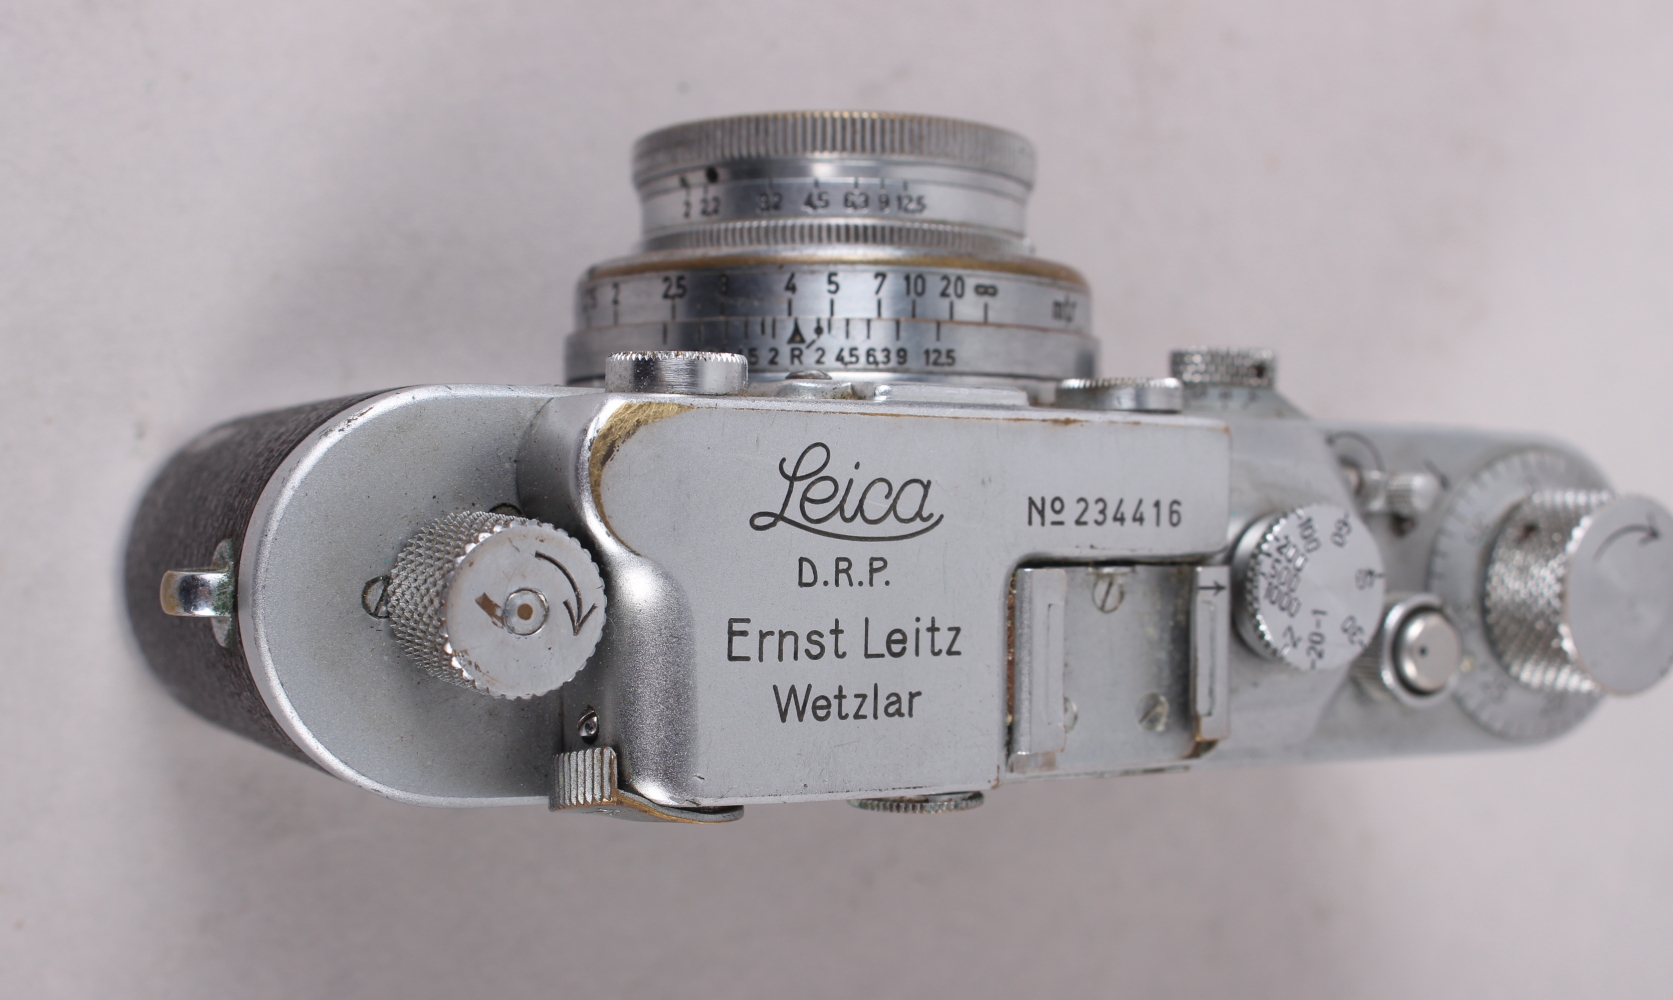 A Leica D R P Rangefinder camera, No 234416, summar f=5cm 1:2 No 350906 lens, in leather case - Image 7 of 9